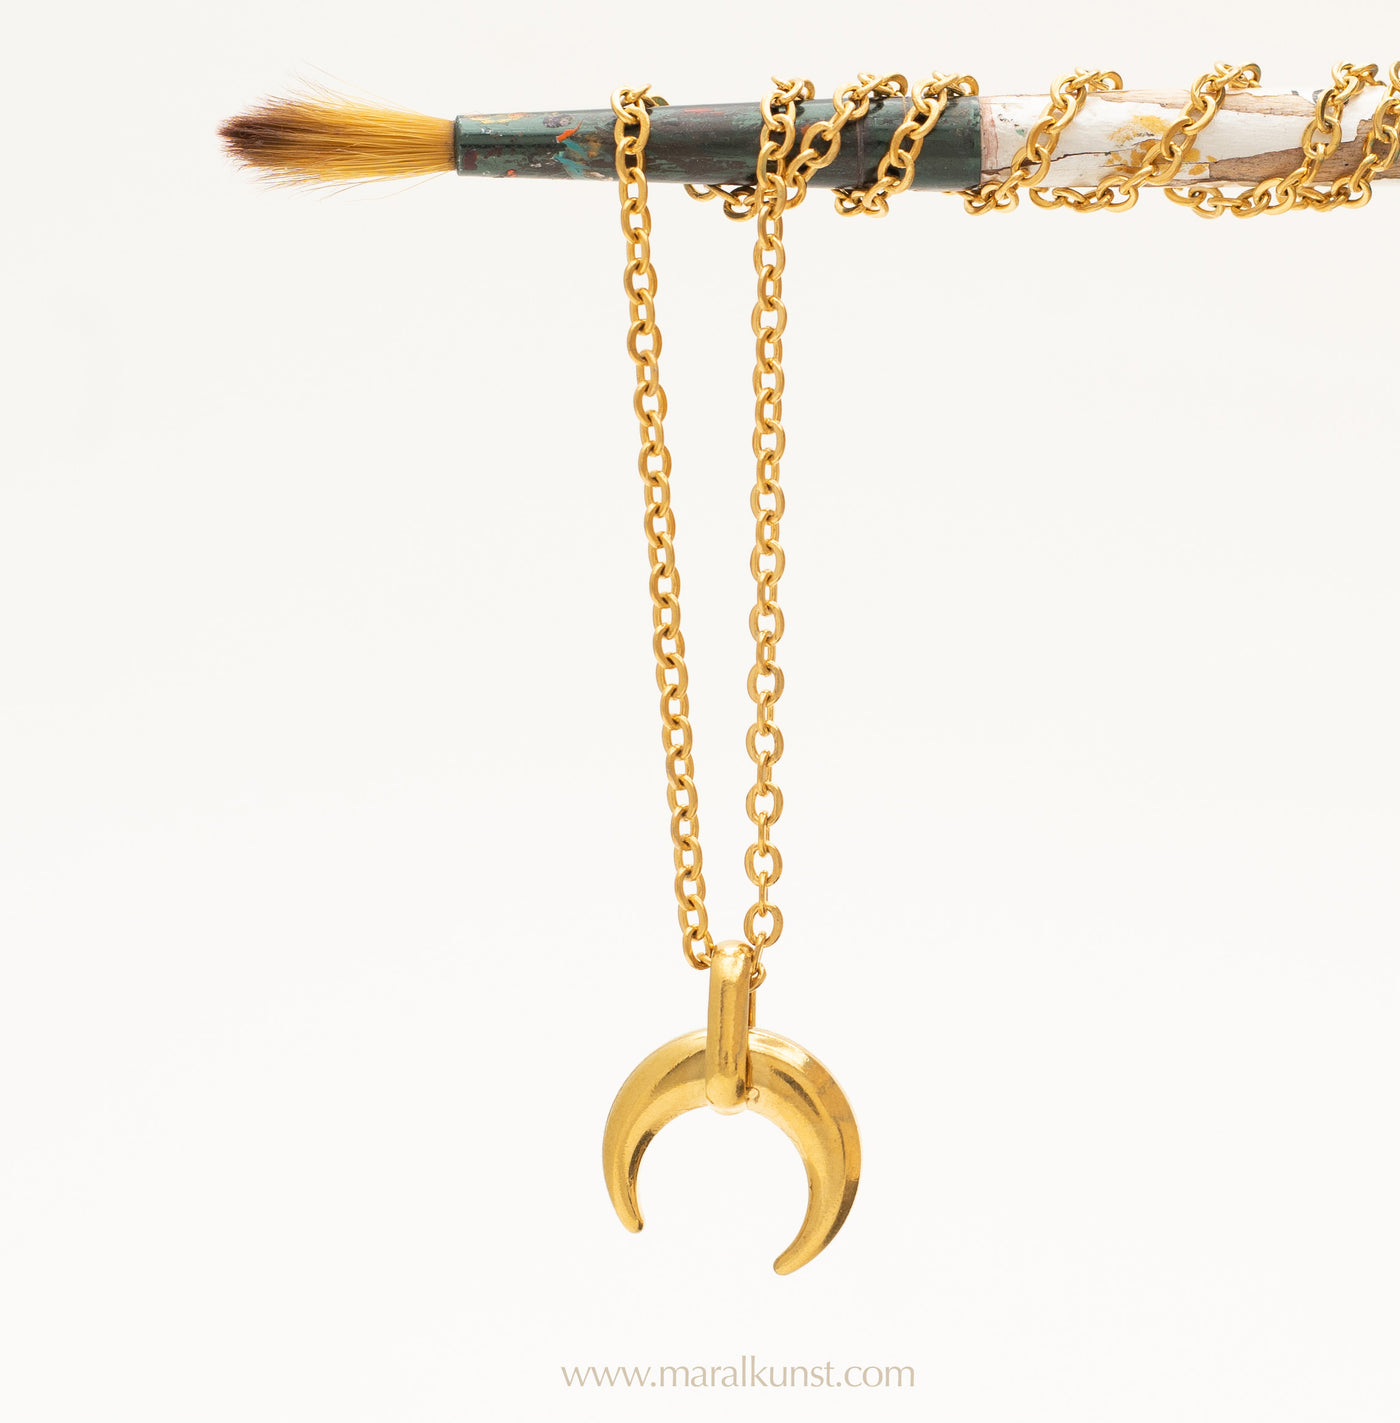 The Moon gold plated necklace